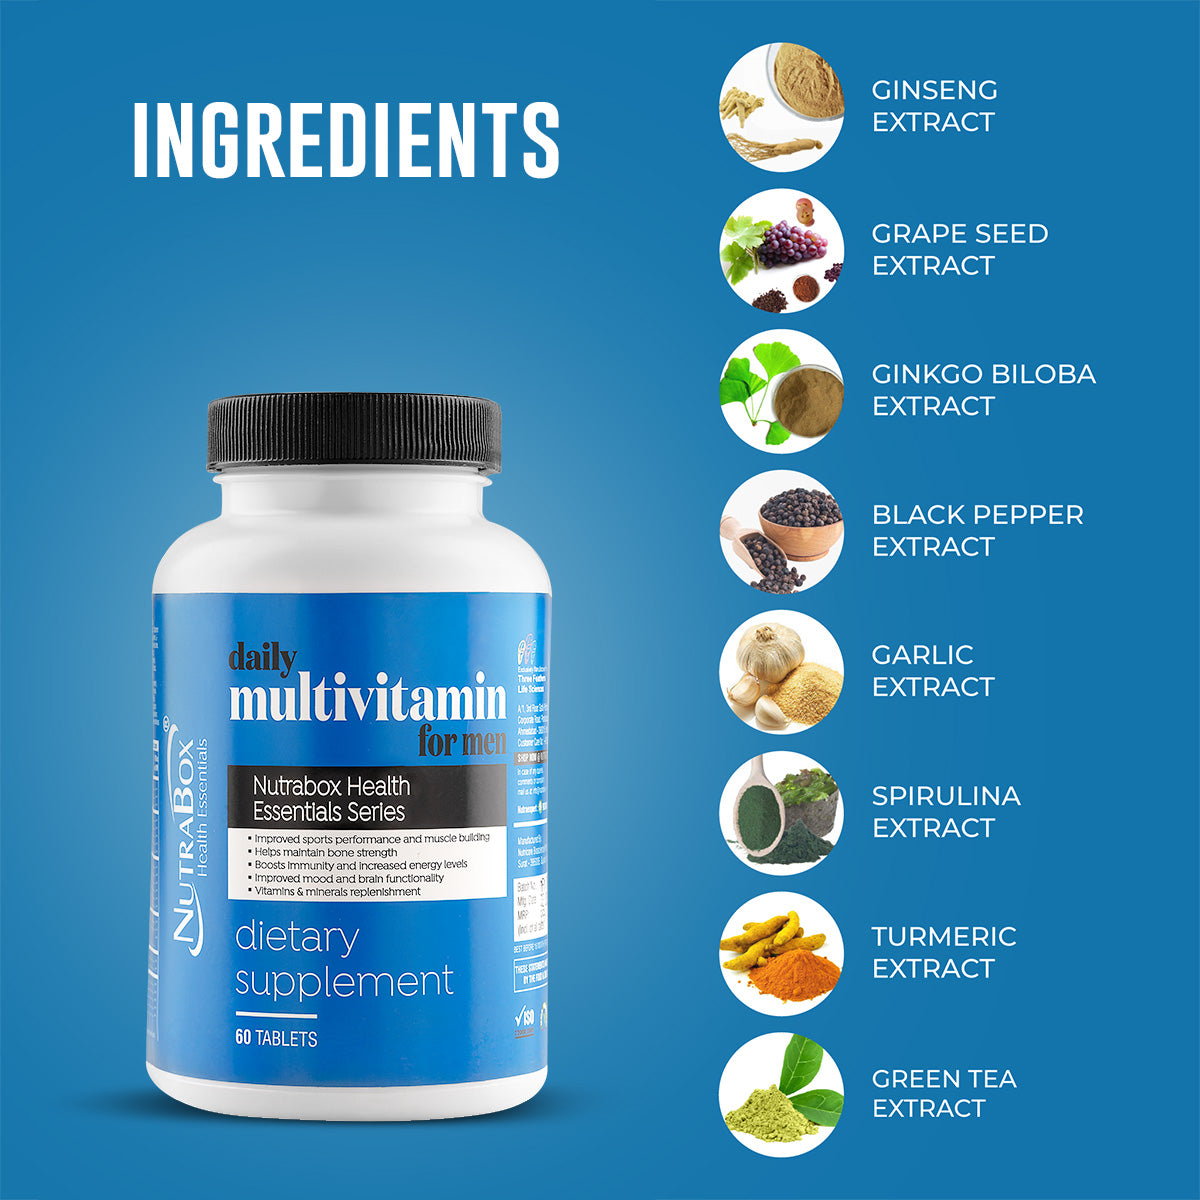 Ingredients of Daily Multivitamins for Men